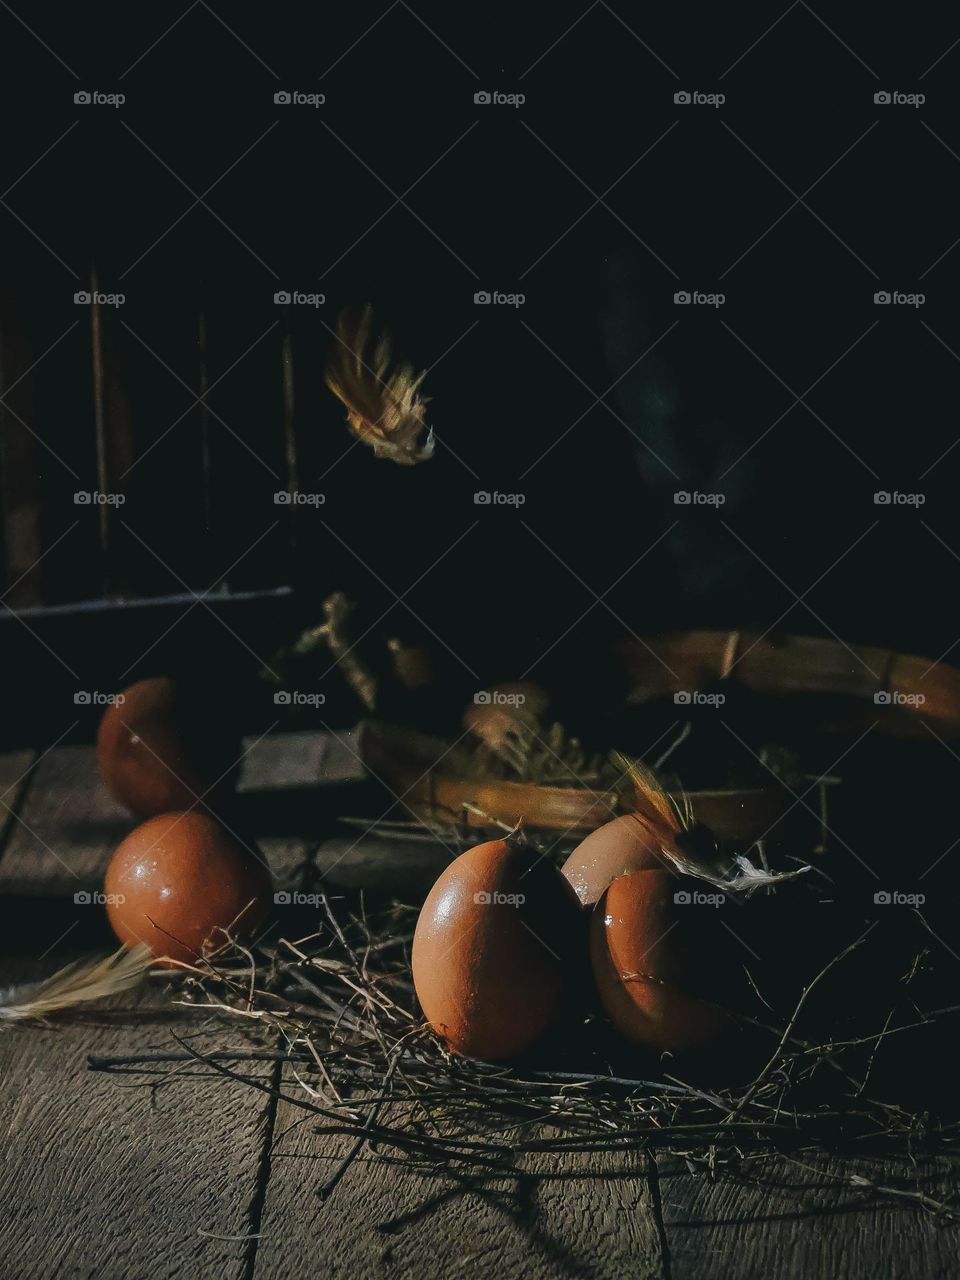 Fresh eggs on the wooden table with dark background.Still life concept photography.